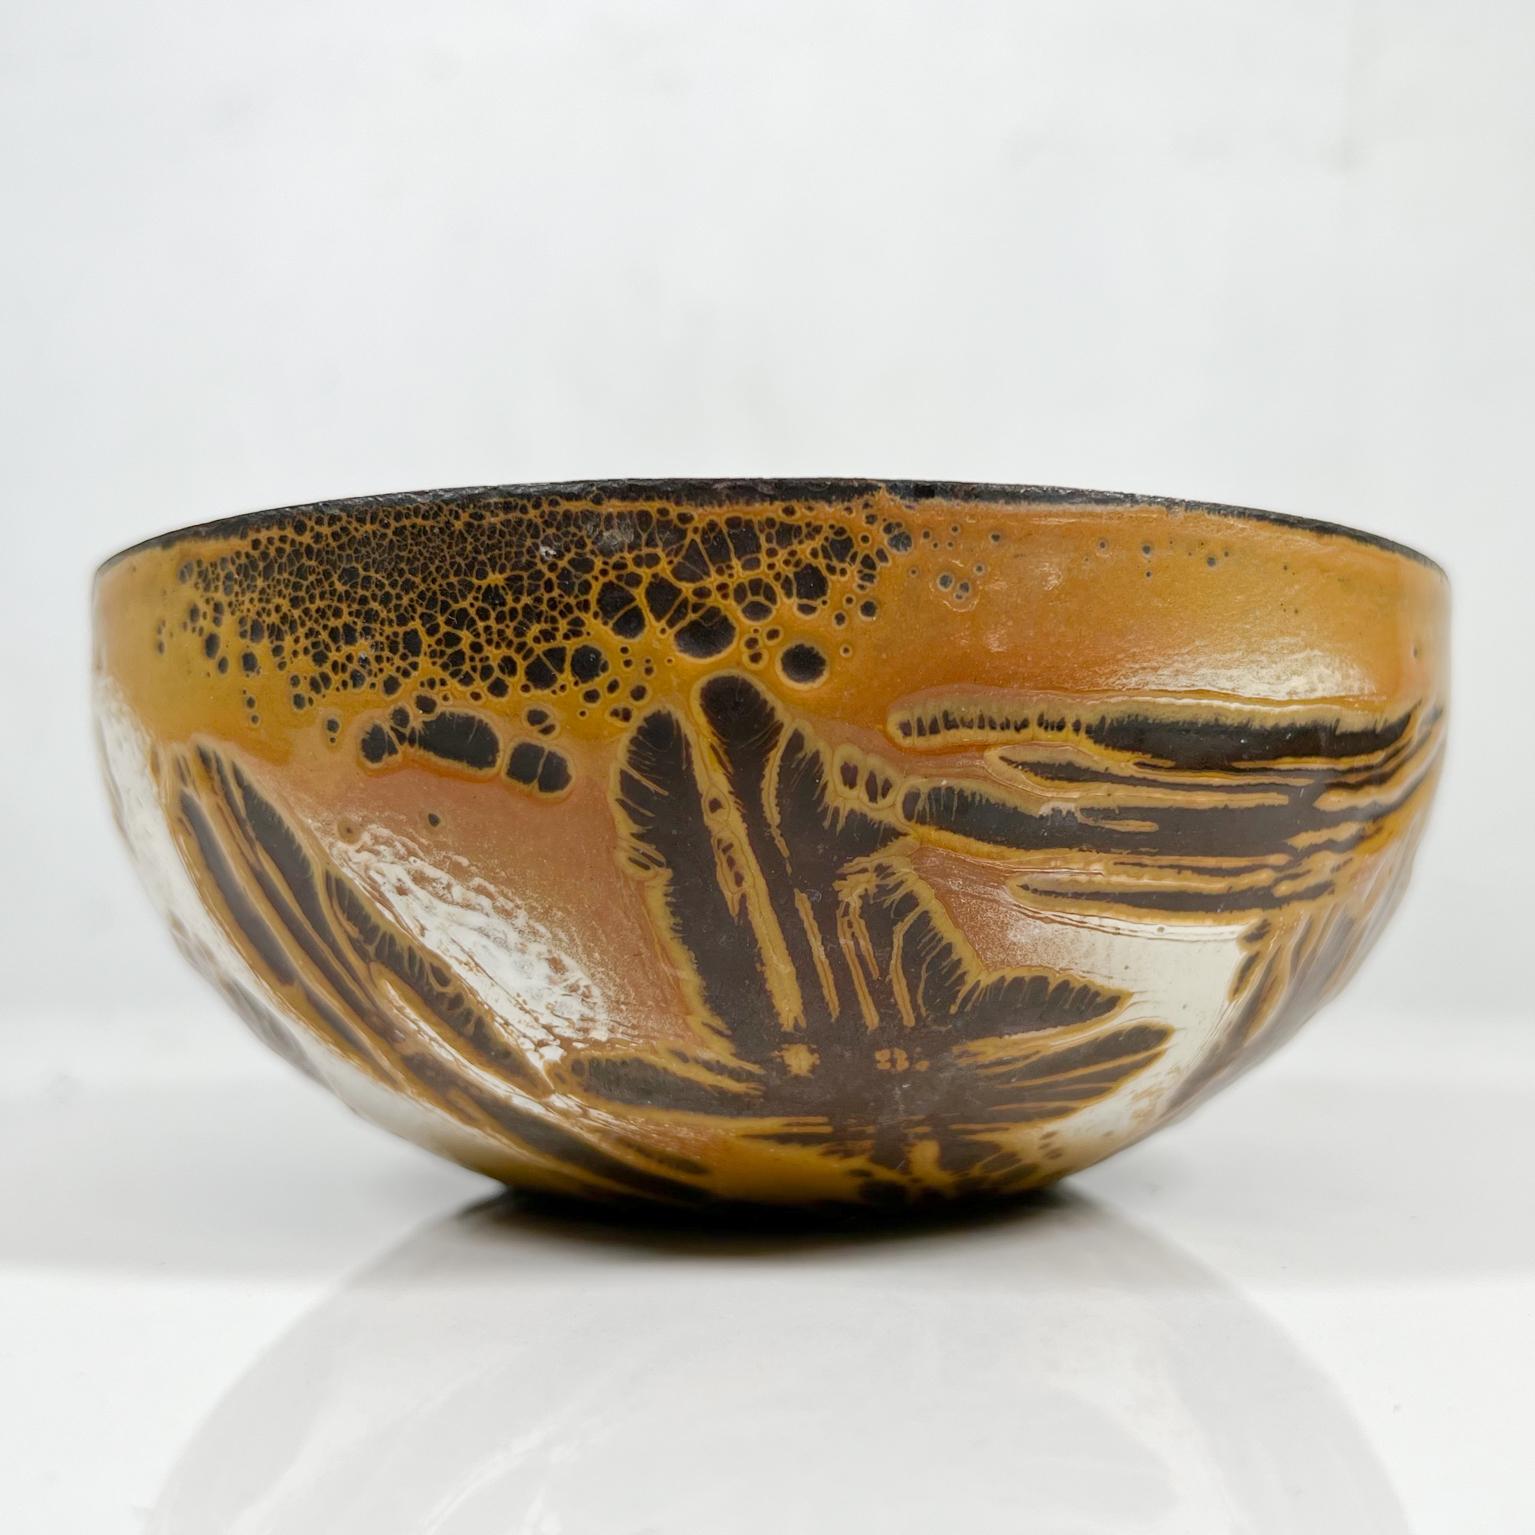 AMBIANIC presents

1960s Hanova of Pasadena artistic brown enamel on steel bowl California.
Enamel lava and crazing texturing technique on steel signifies Hanova Pasadena Pottery Art California
Measures: 5.75 x 2.5.
Preowned original unaltered